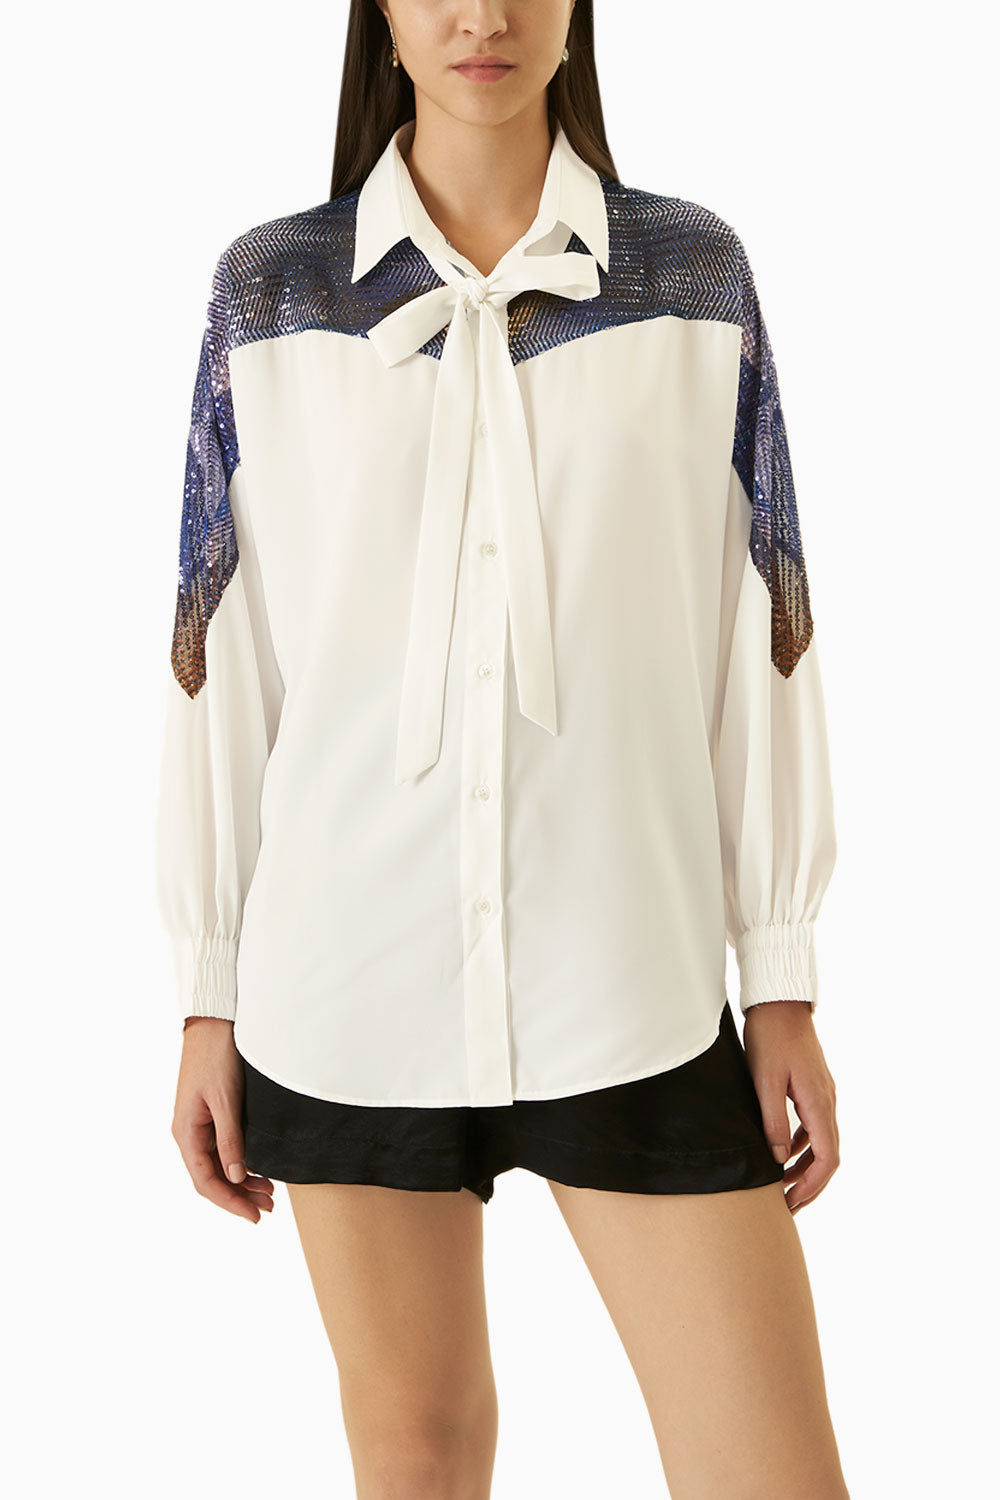 White and Black Knot Shirt